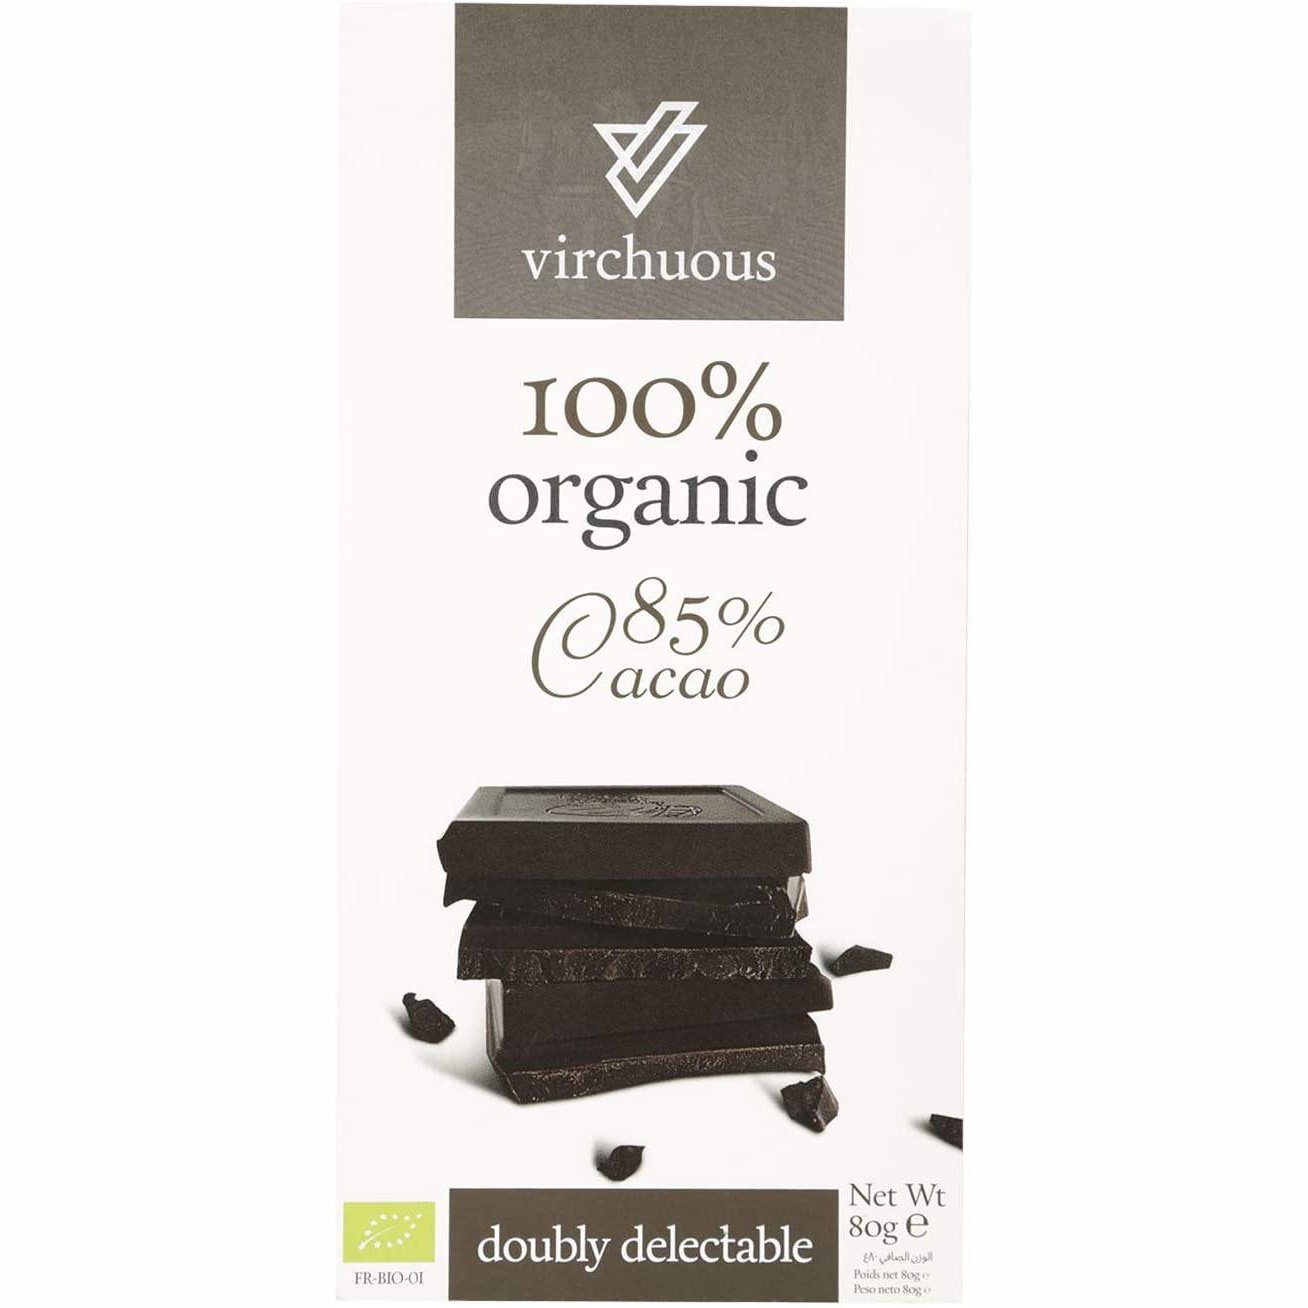 Virchuous Organic Chocolate Dark 85%, 80 gm - Med7 Online